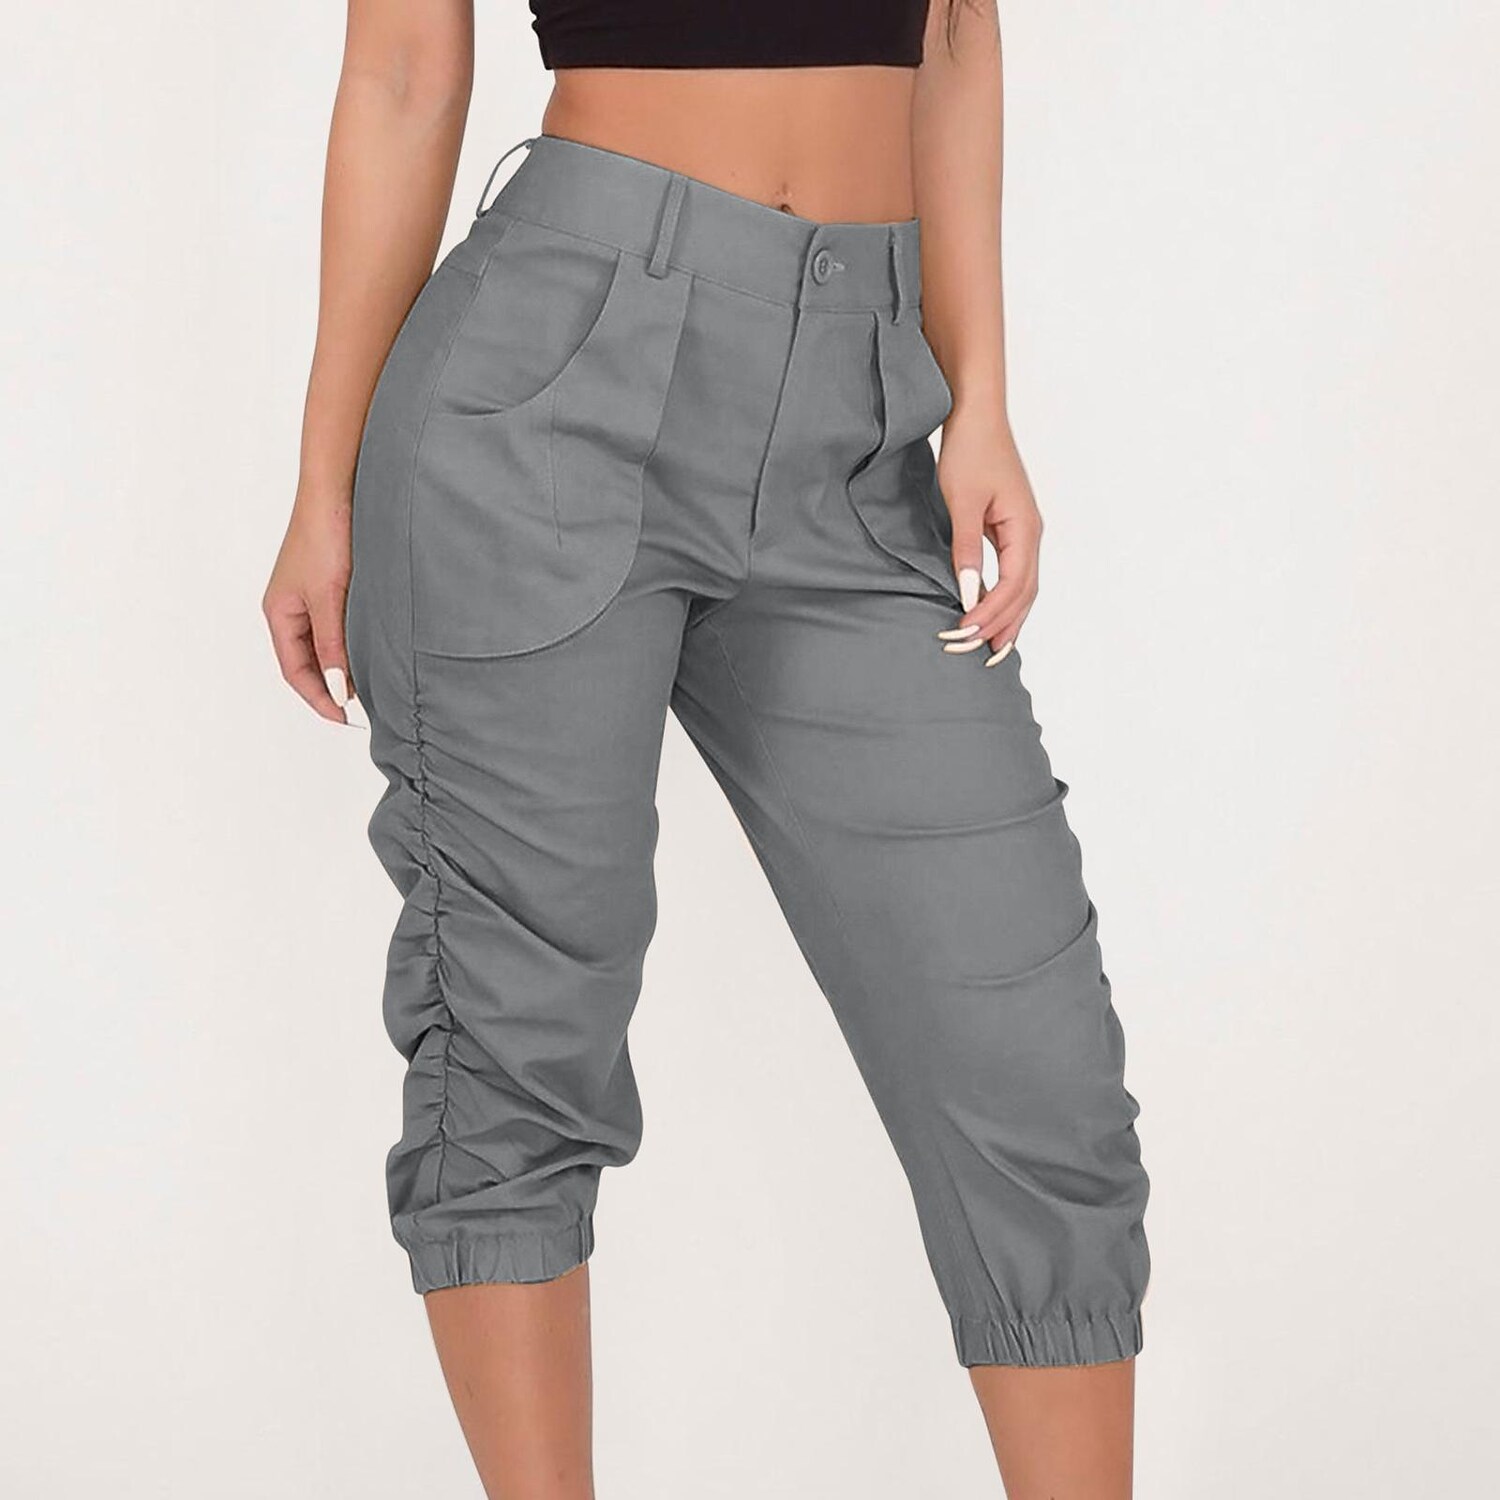 Women's casual cropped overalls comfortable harem pants